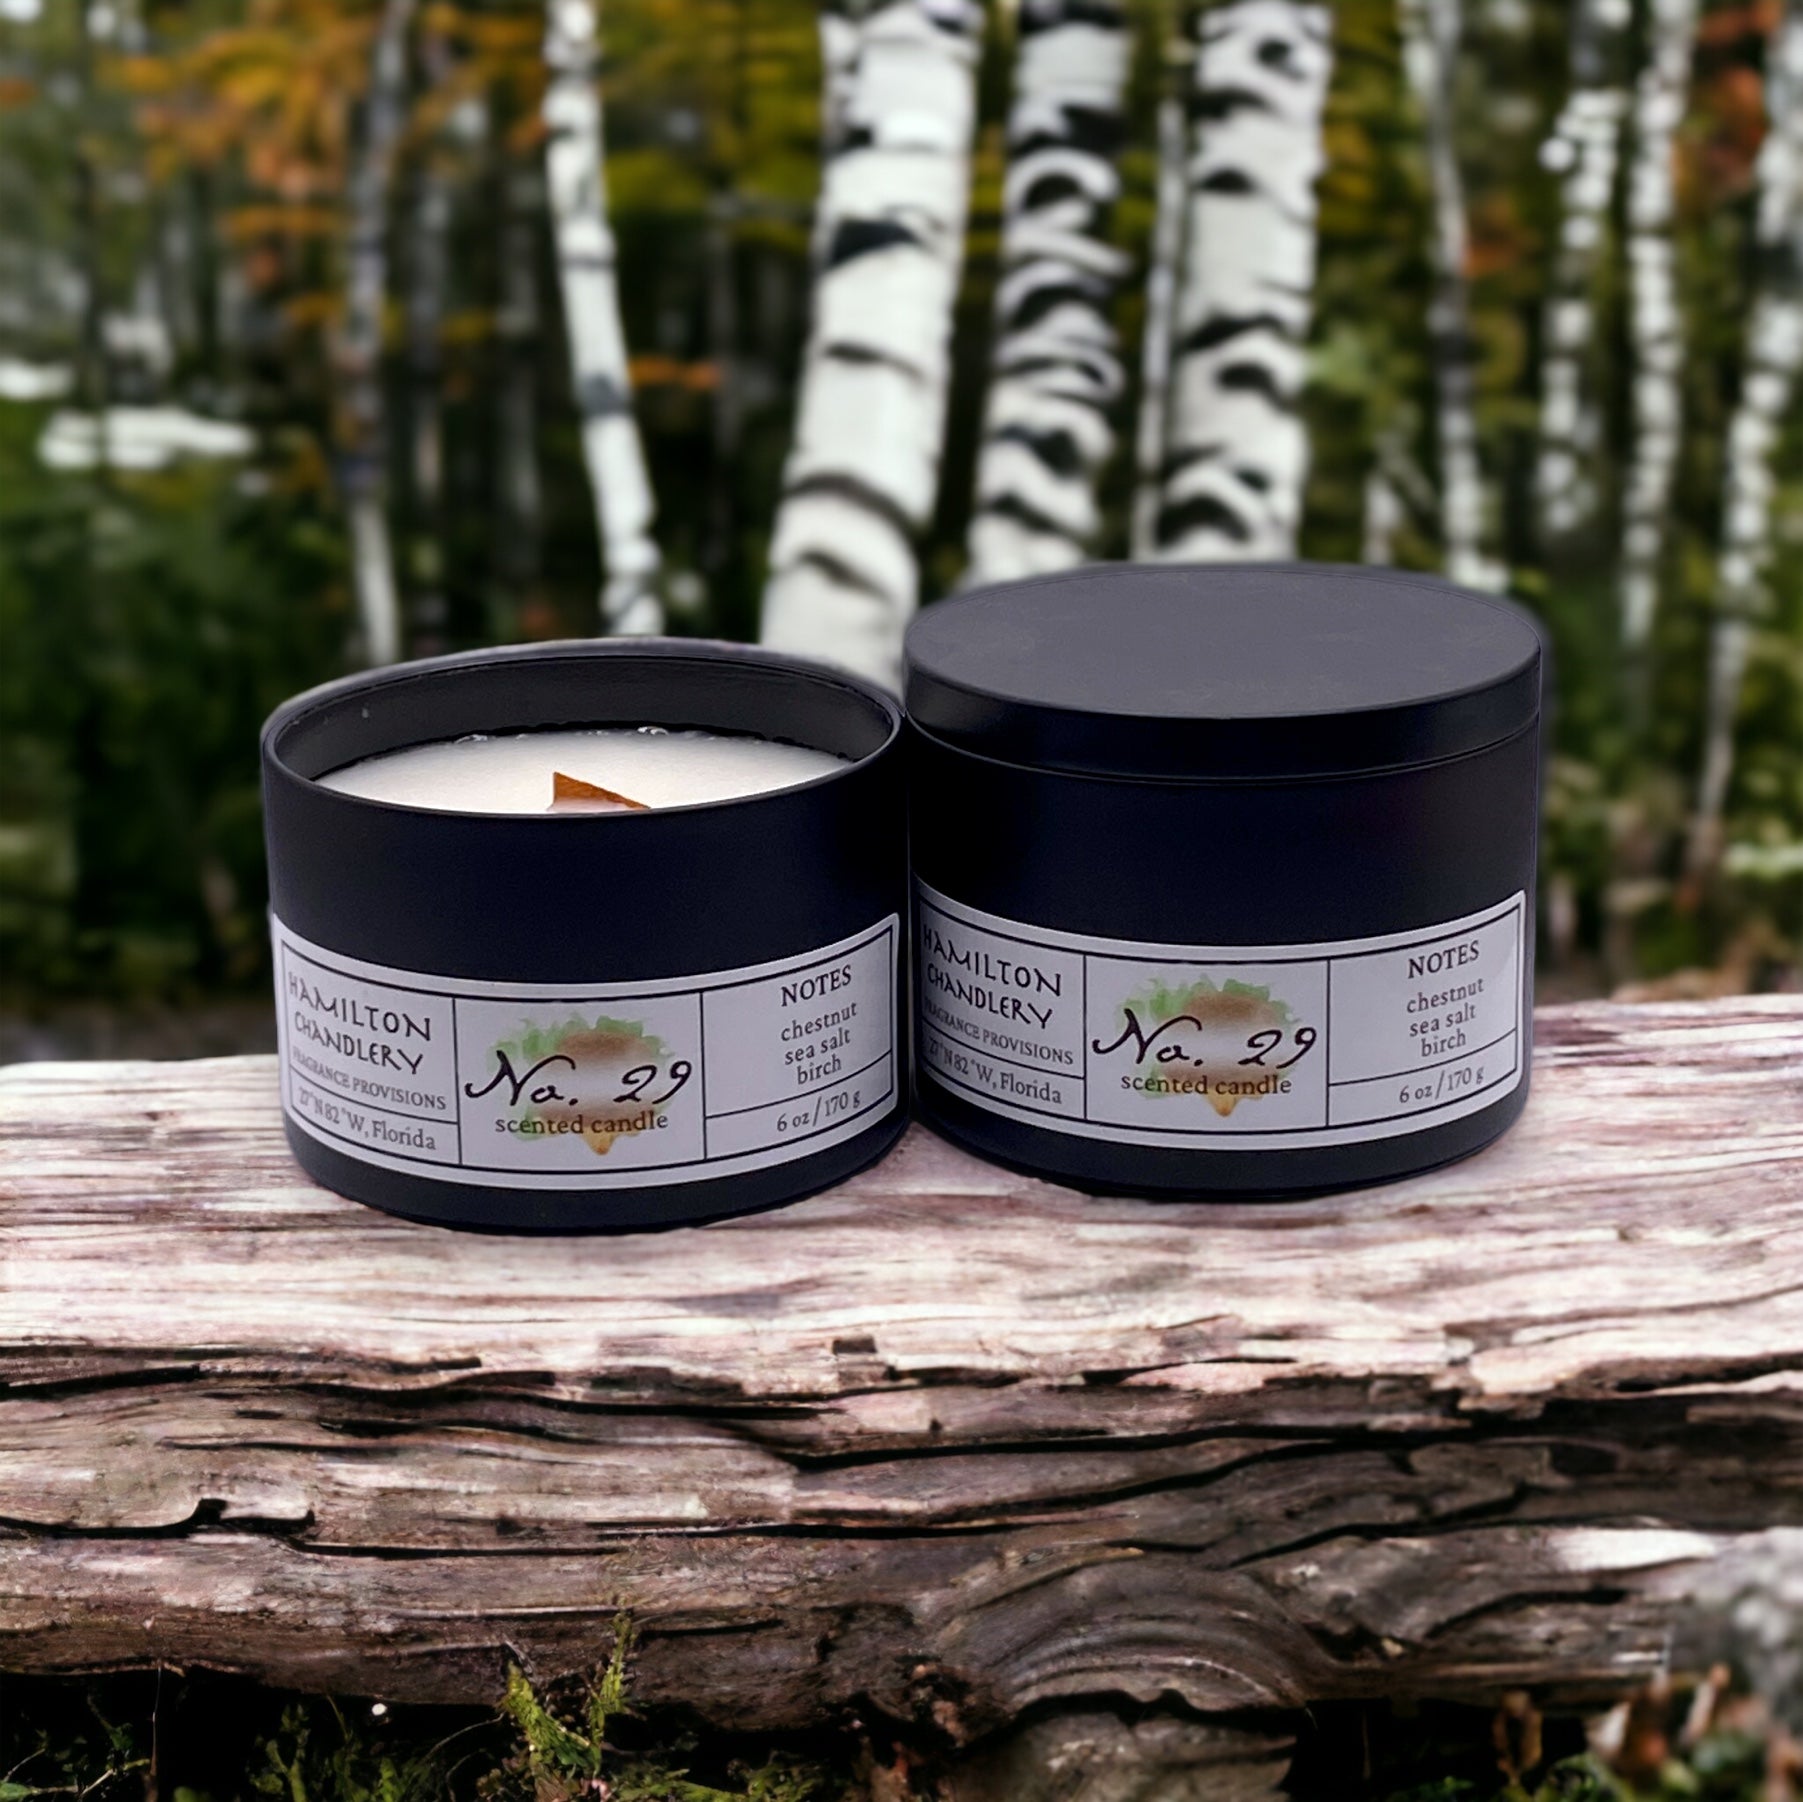 Fragrance No. 29 Travel Tin Candle on Stump with Birch Trees in Background | Hamilton Chandlery